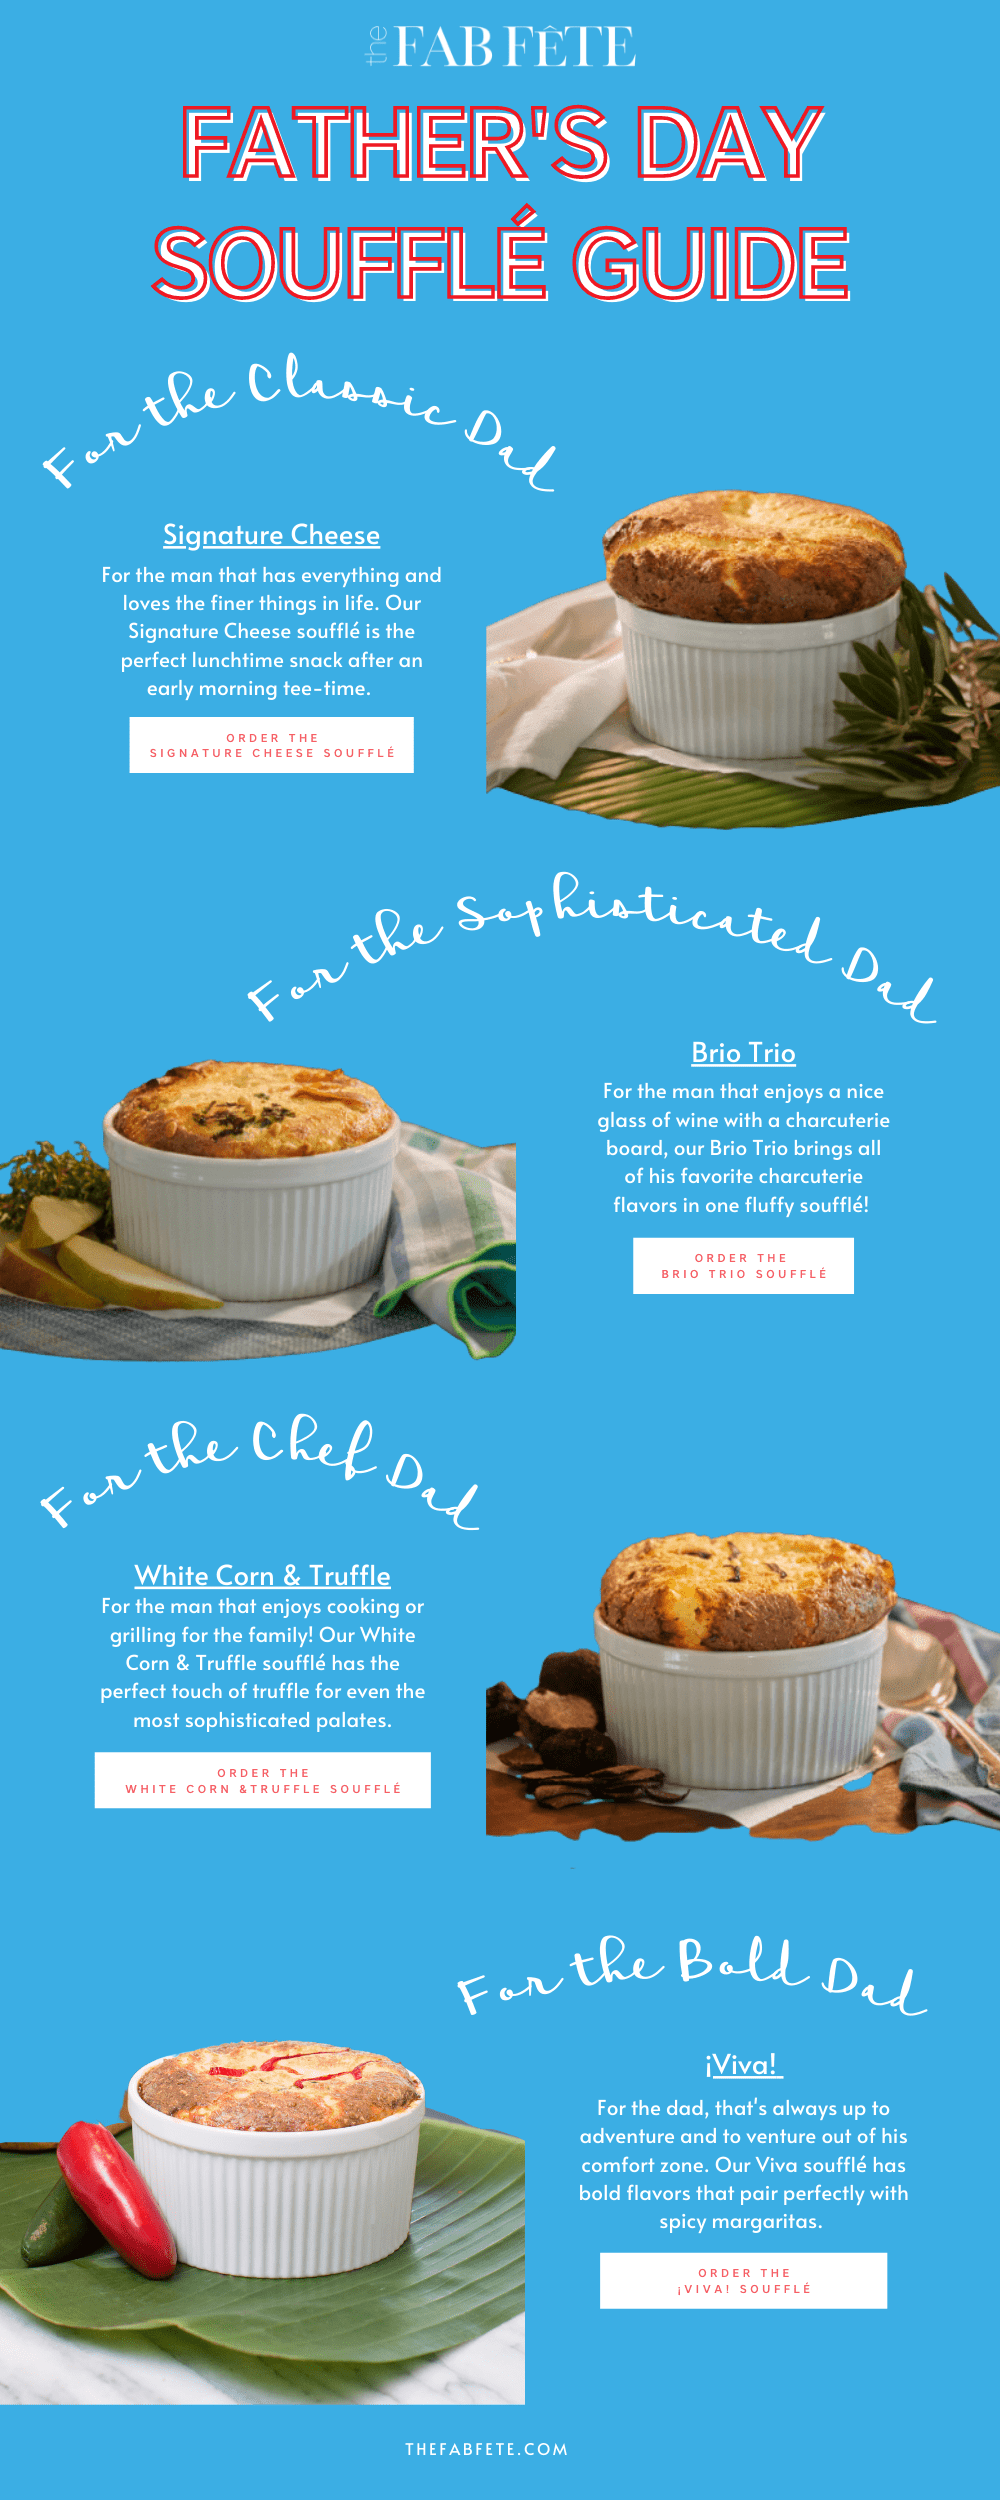 The Fab Fête Cheese Soufflés Delivered - Father's Day Soufflé Guide